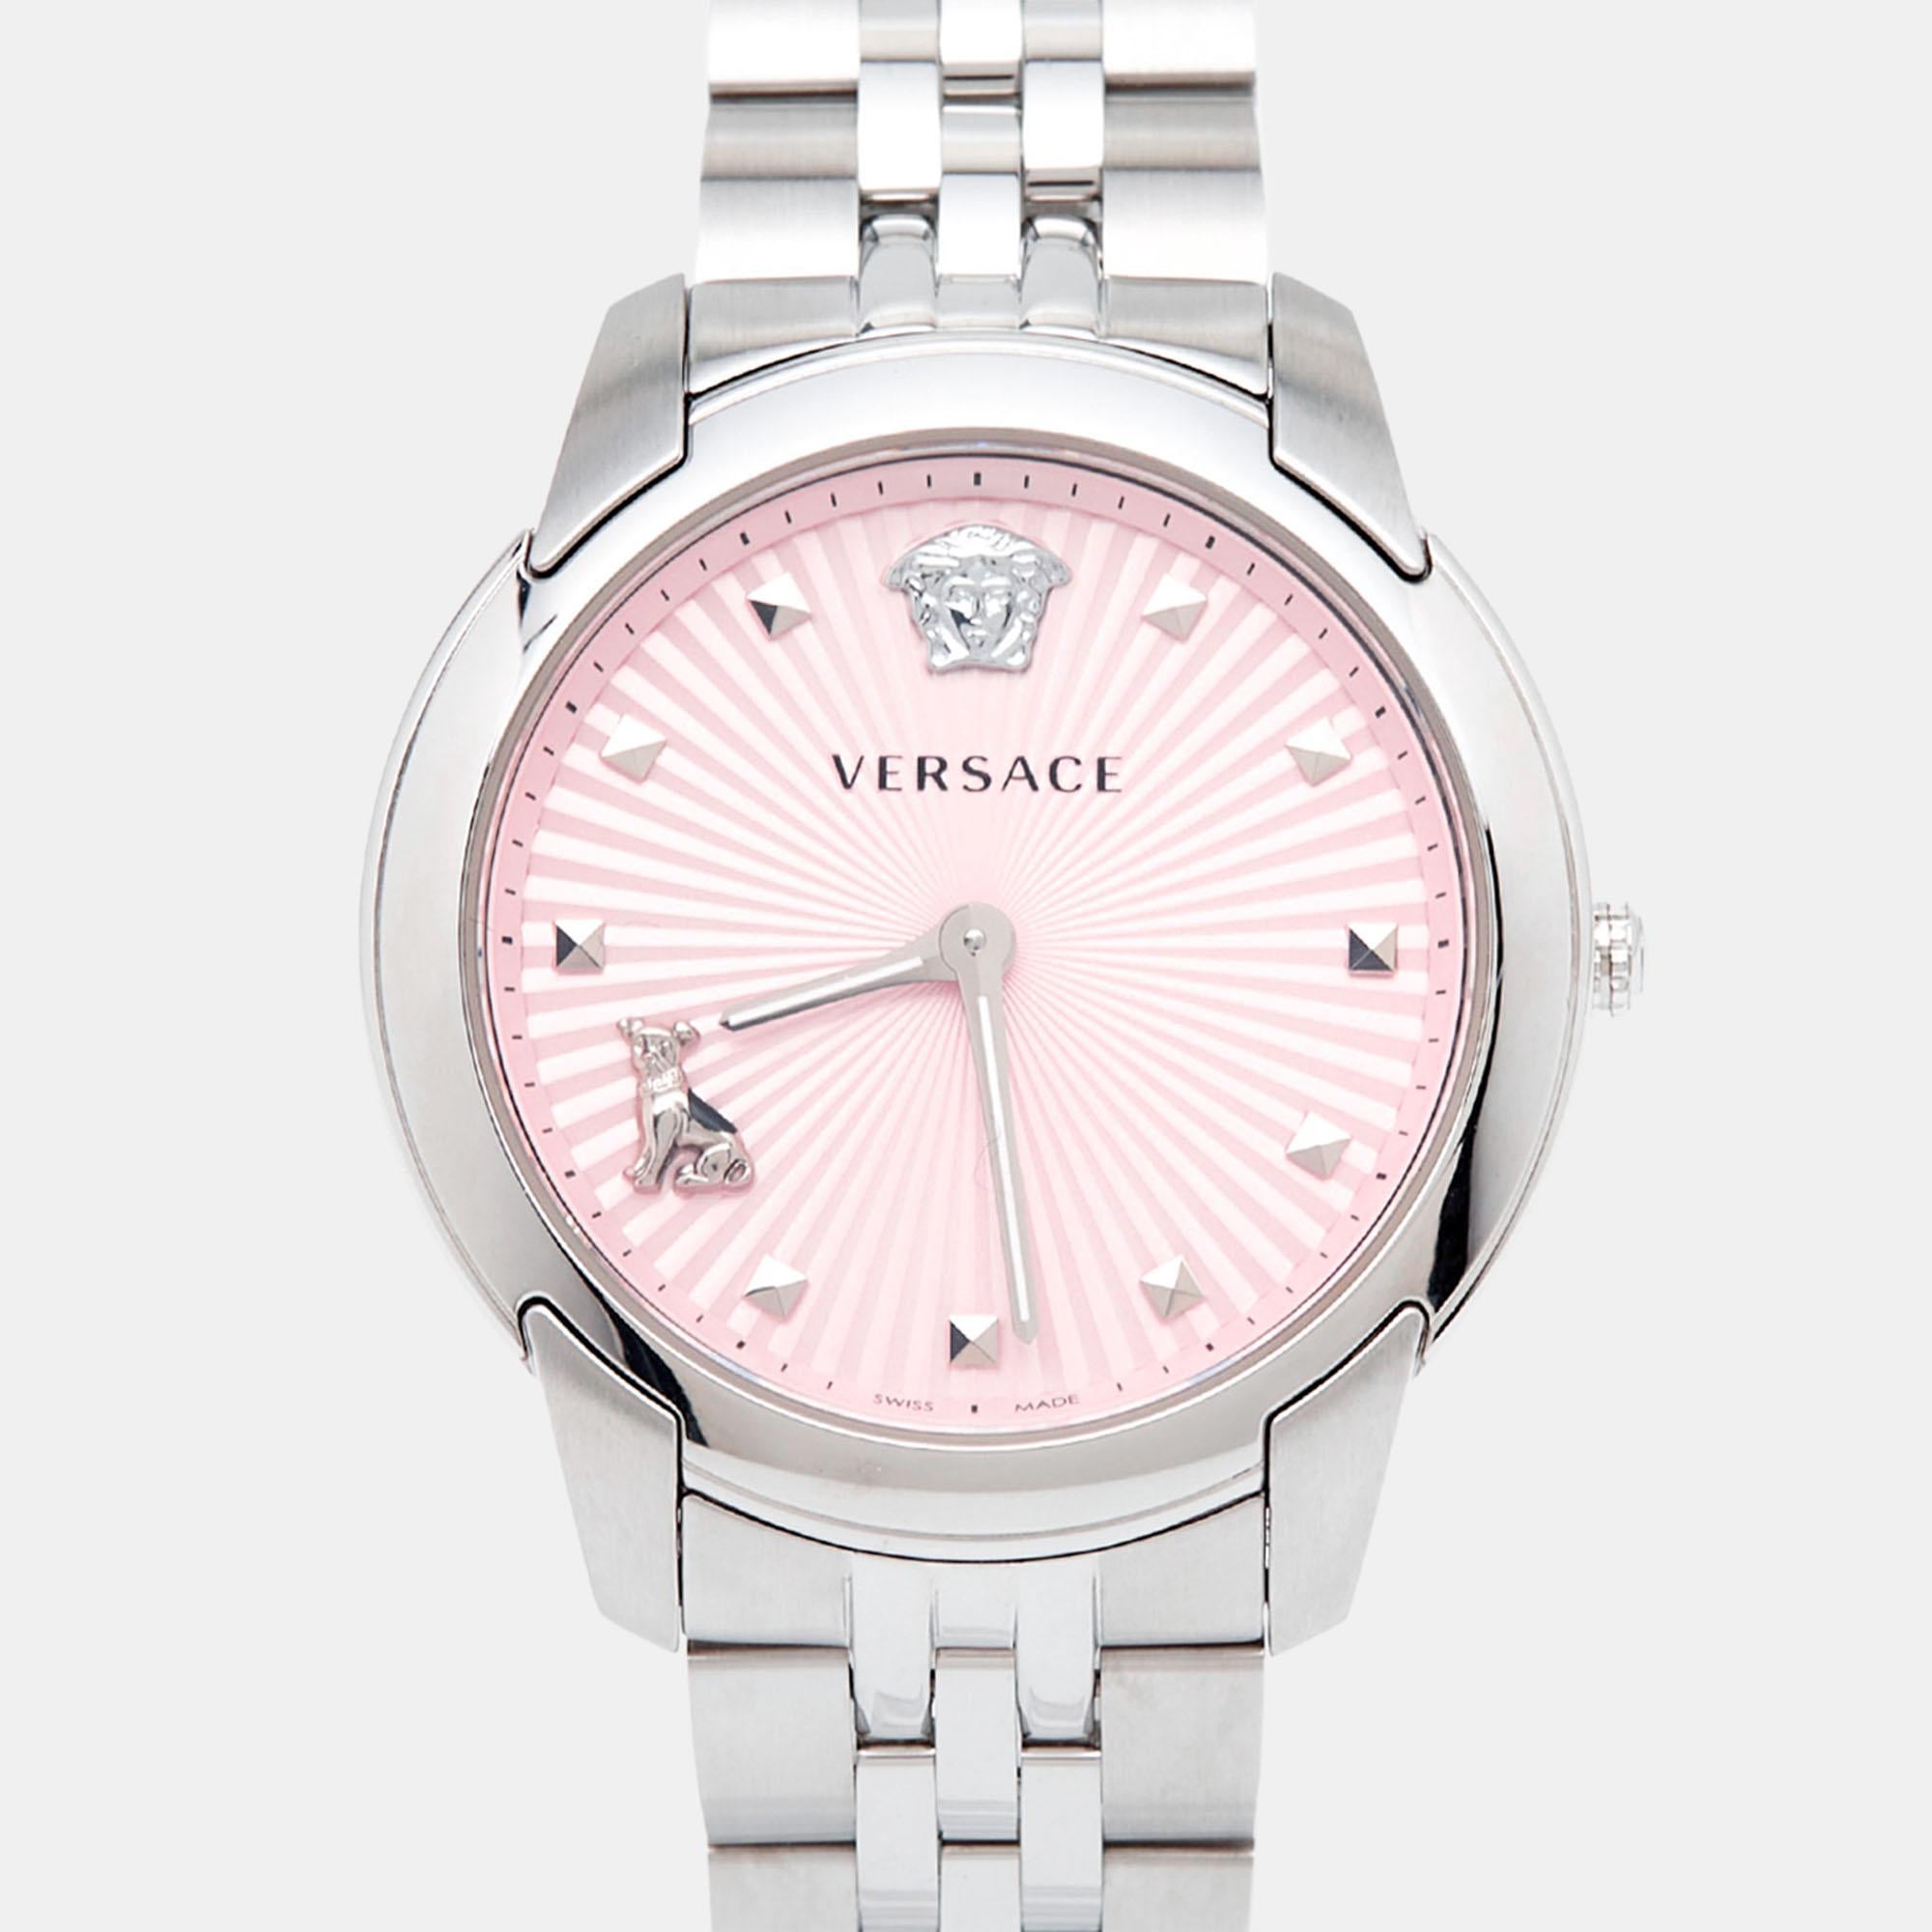 Experience the timeless allure of the Versace Audrey VELR00419 Women's Wristwatch. Effortlessly blending femininity with functionality, this timepiece boasts a striking stainless steel design. Its sleek pink dial features elegant hour markers and